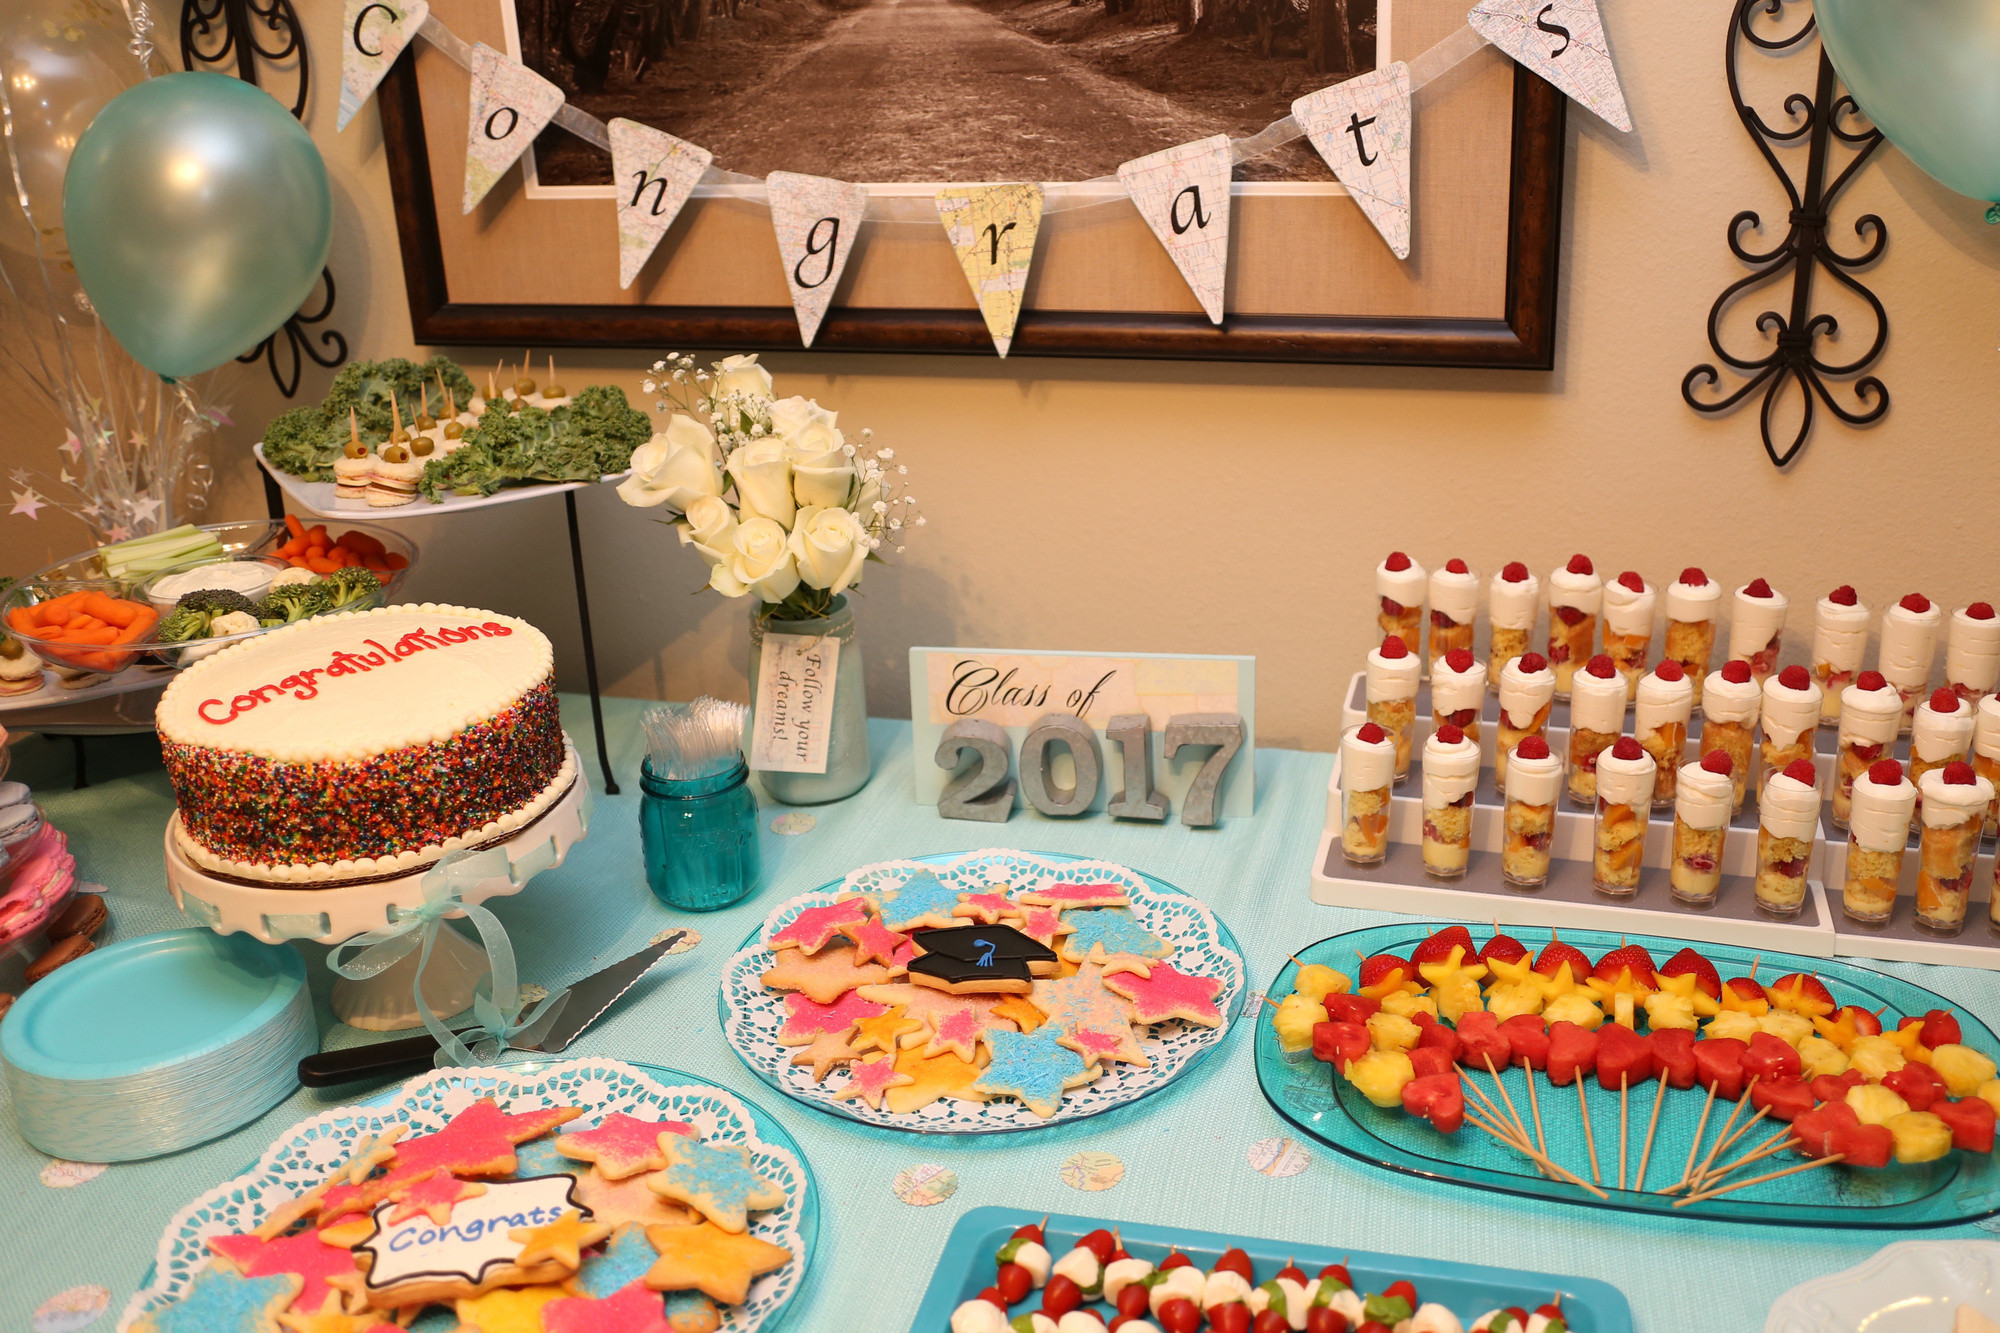 Party Food Ideas For Graduation
 9 Incredible Graduation Party Food Ideas